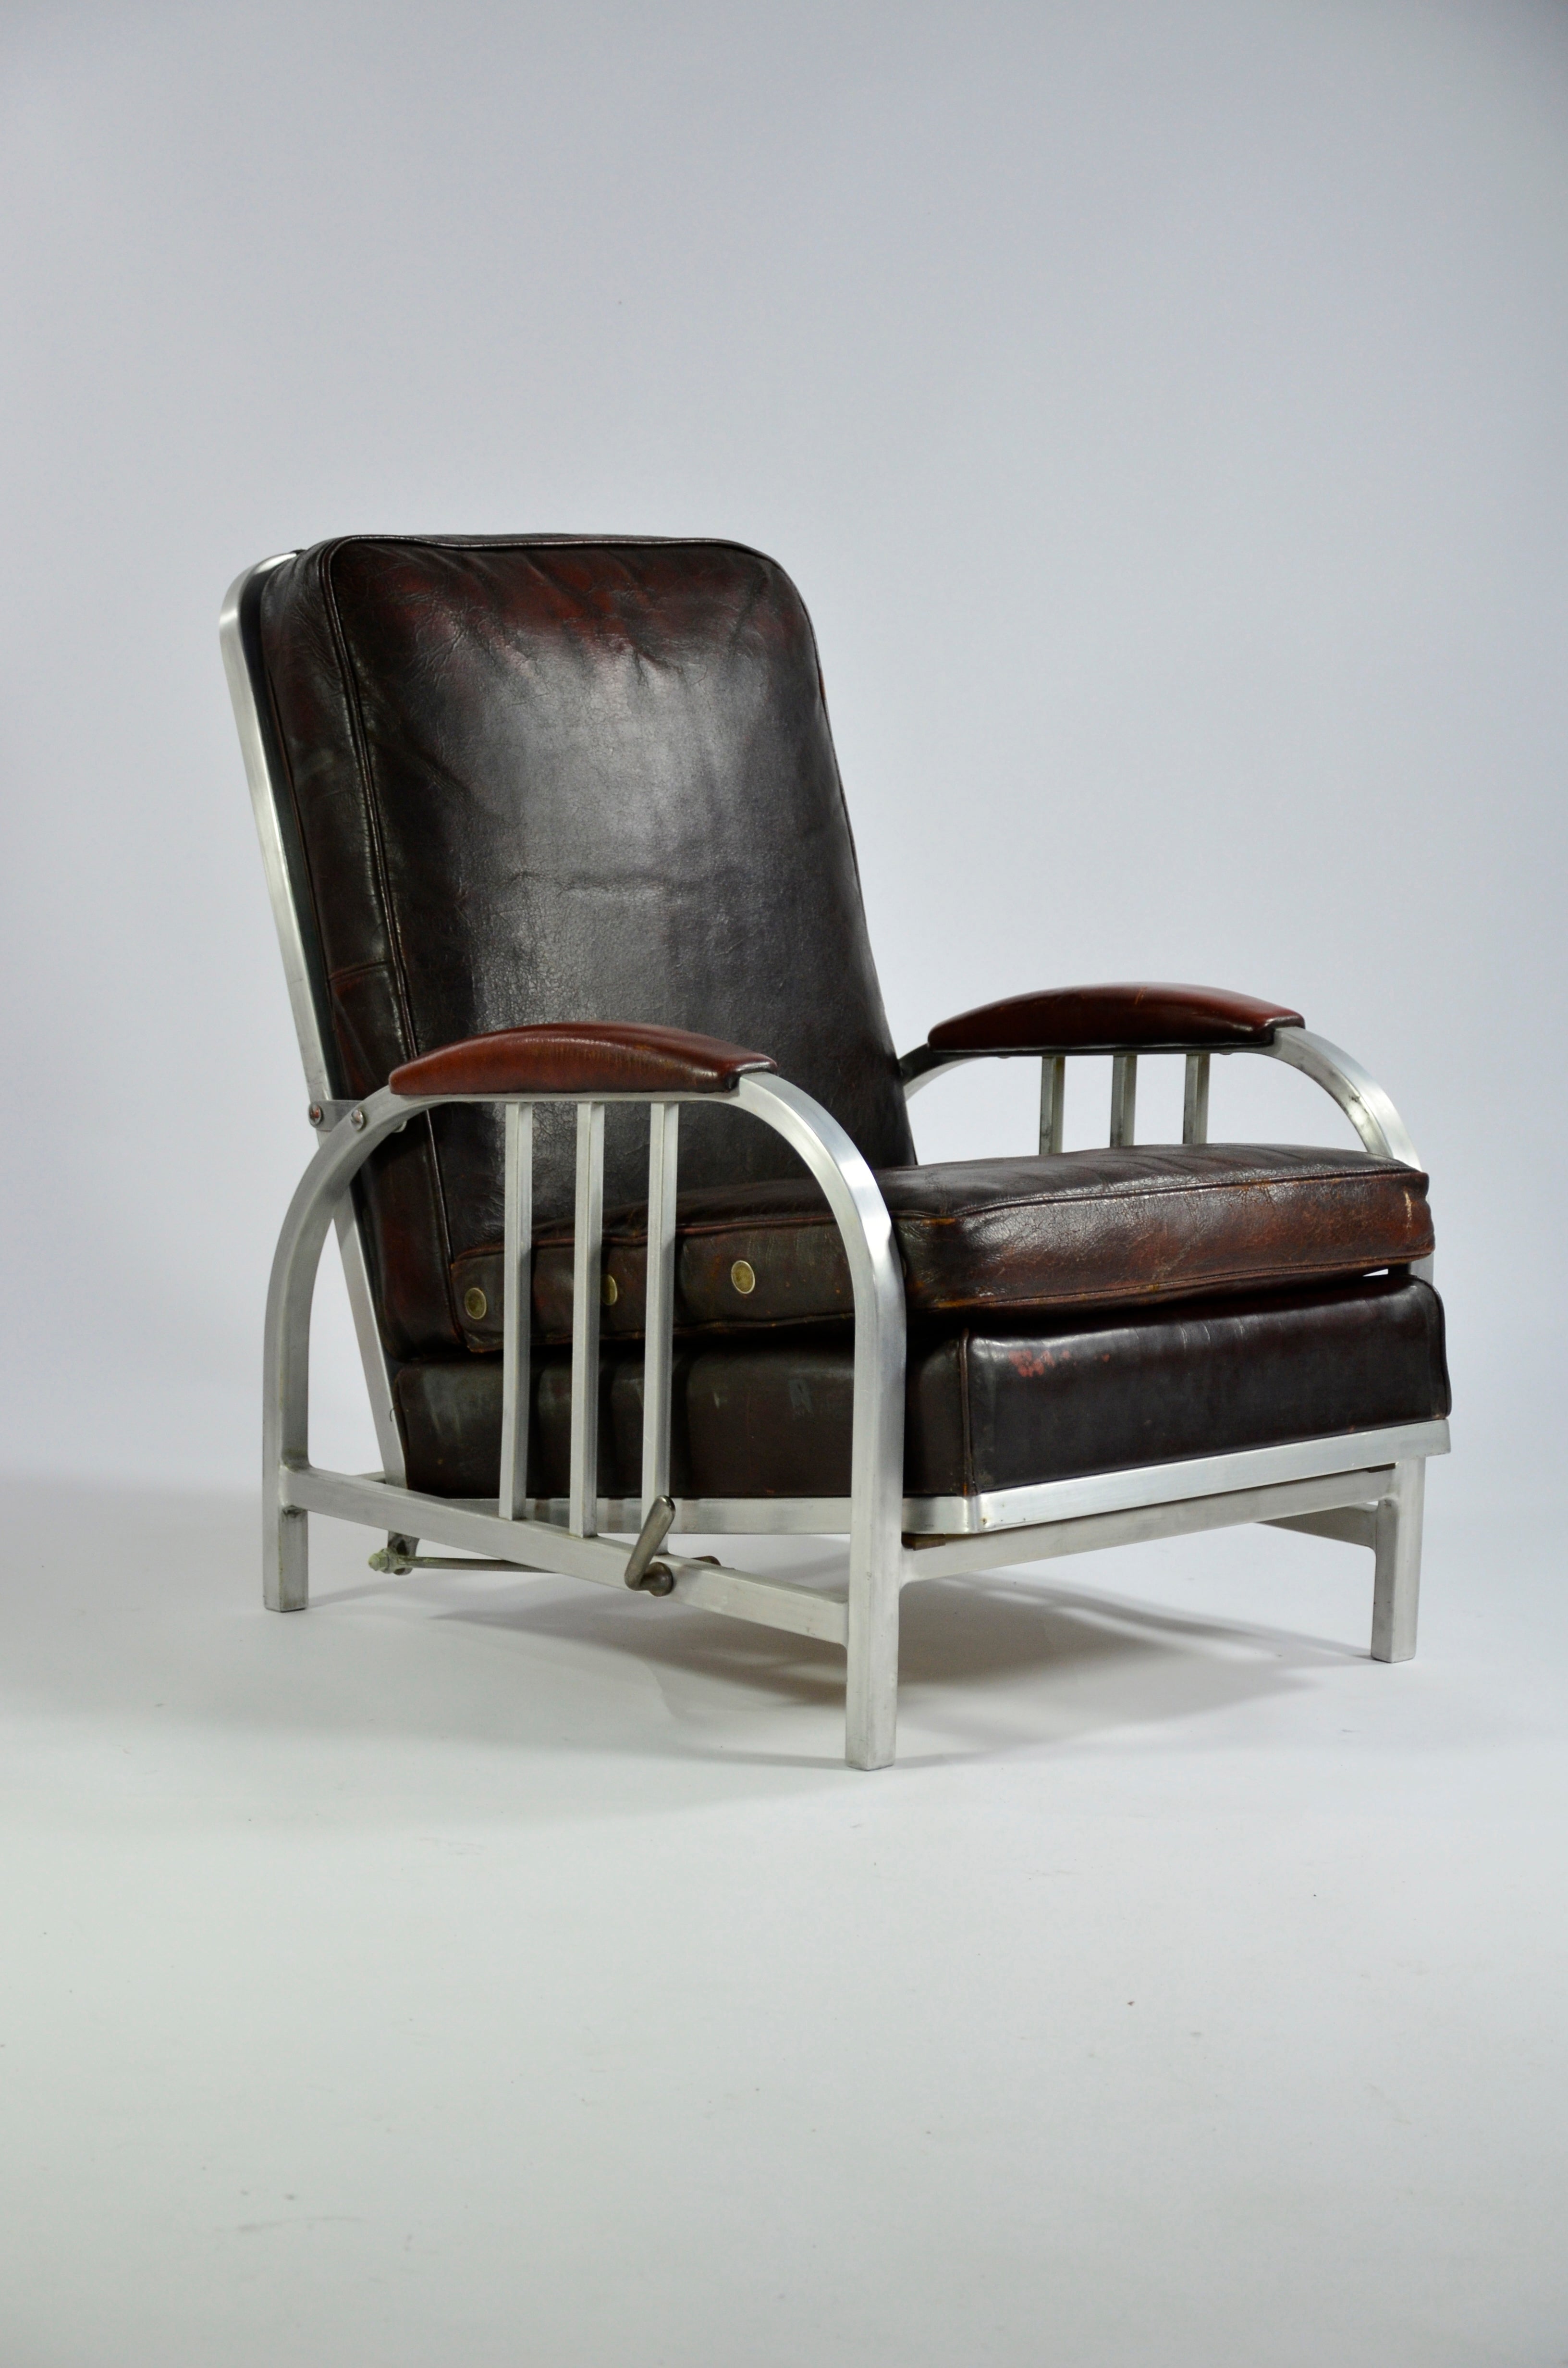 Art Deco Reclining Lounge Chair by Goodform